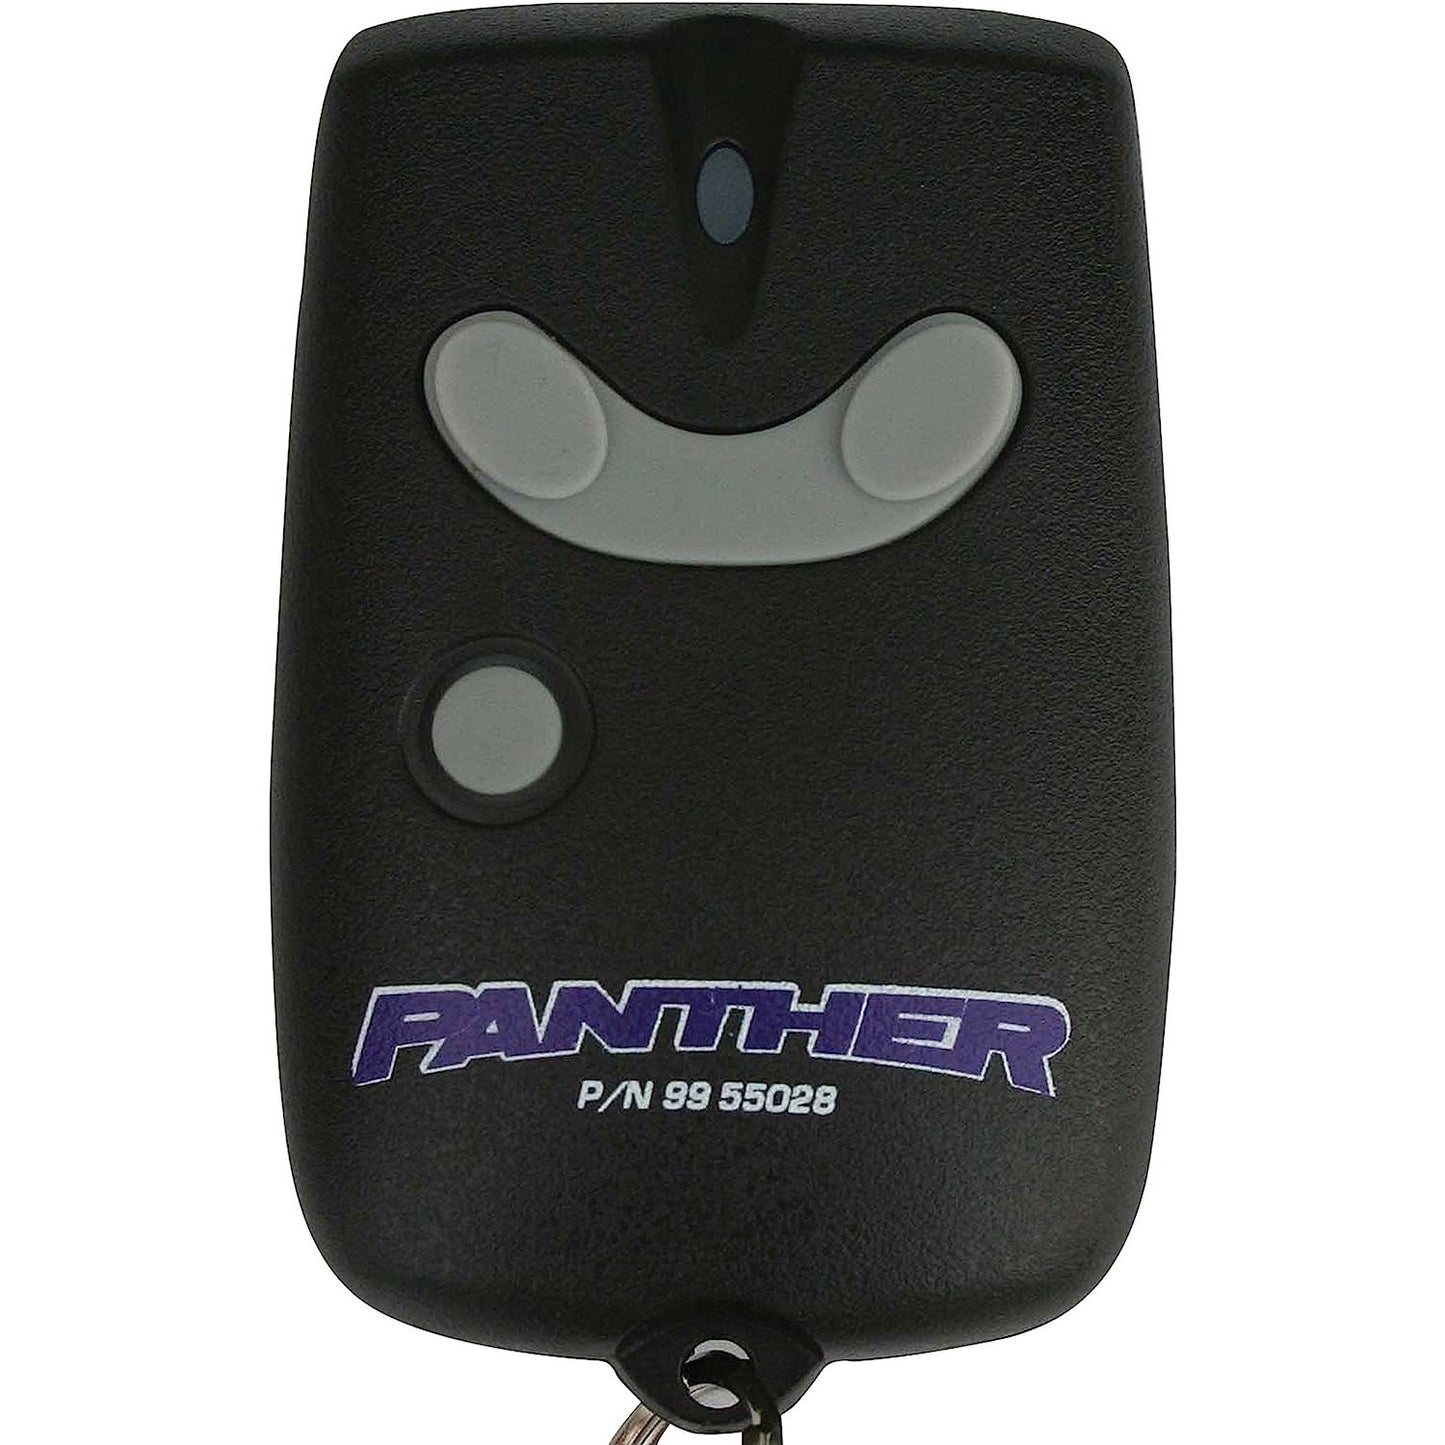 Panther Optional Wireless Remote For Electrosteer